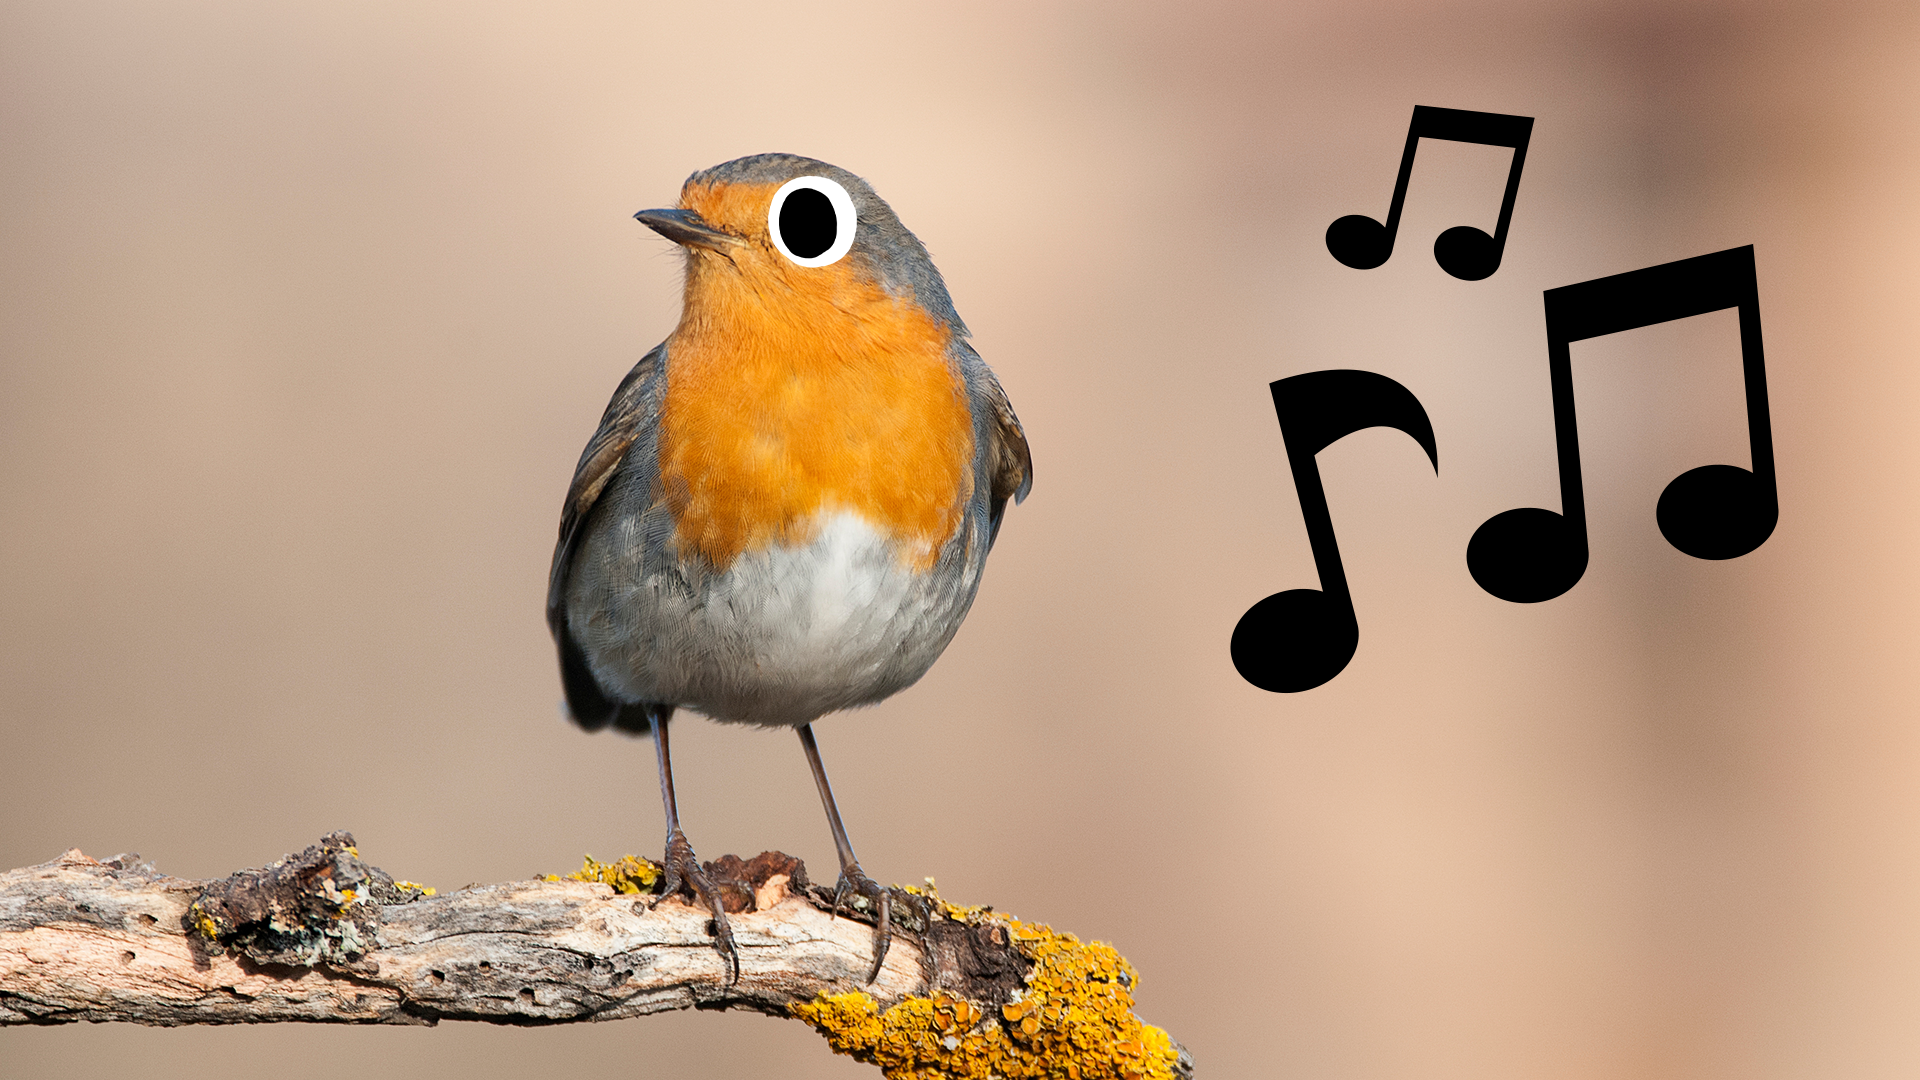 Robin on branch with musical notes